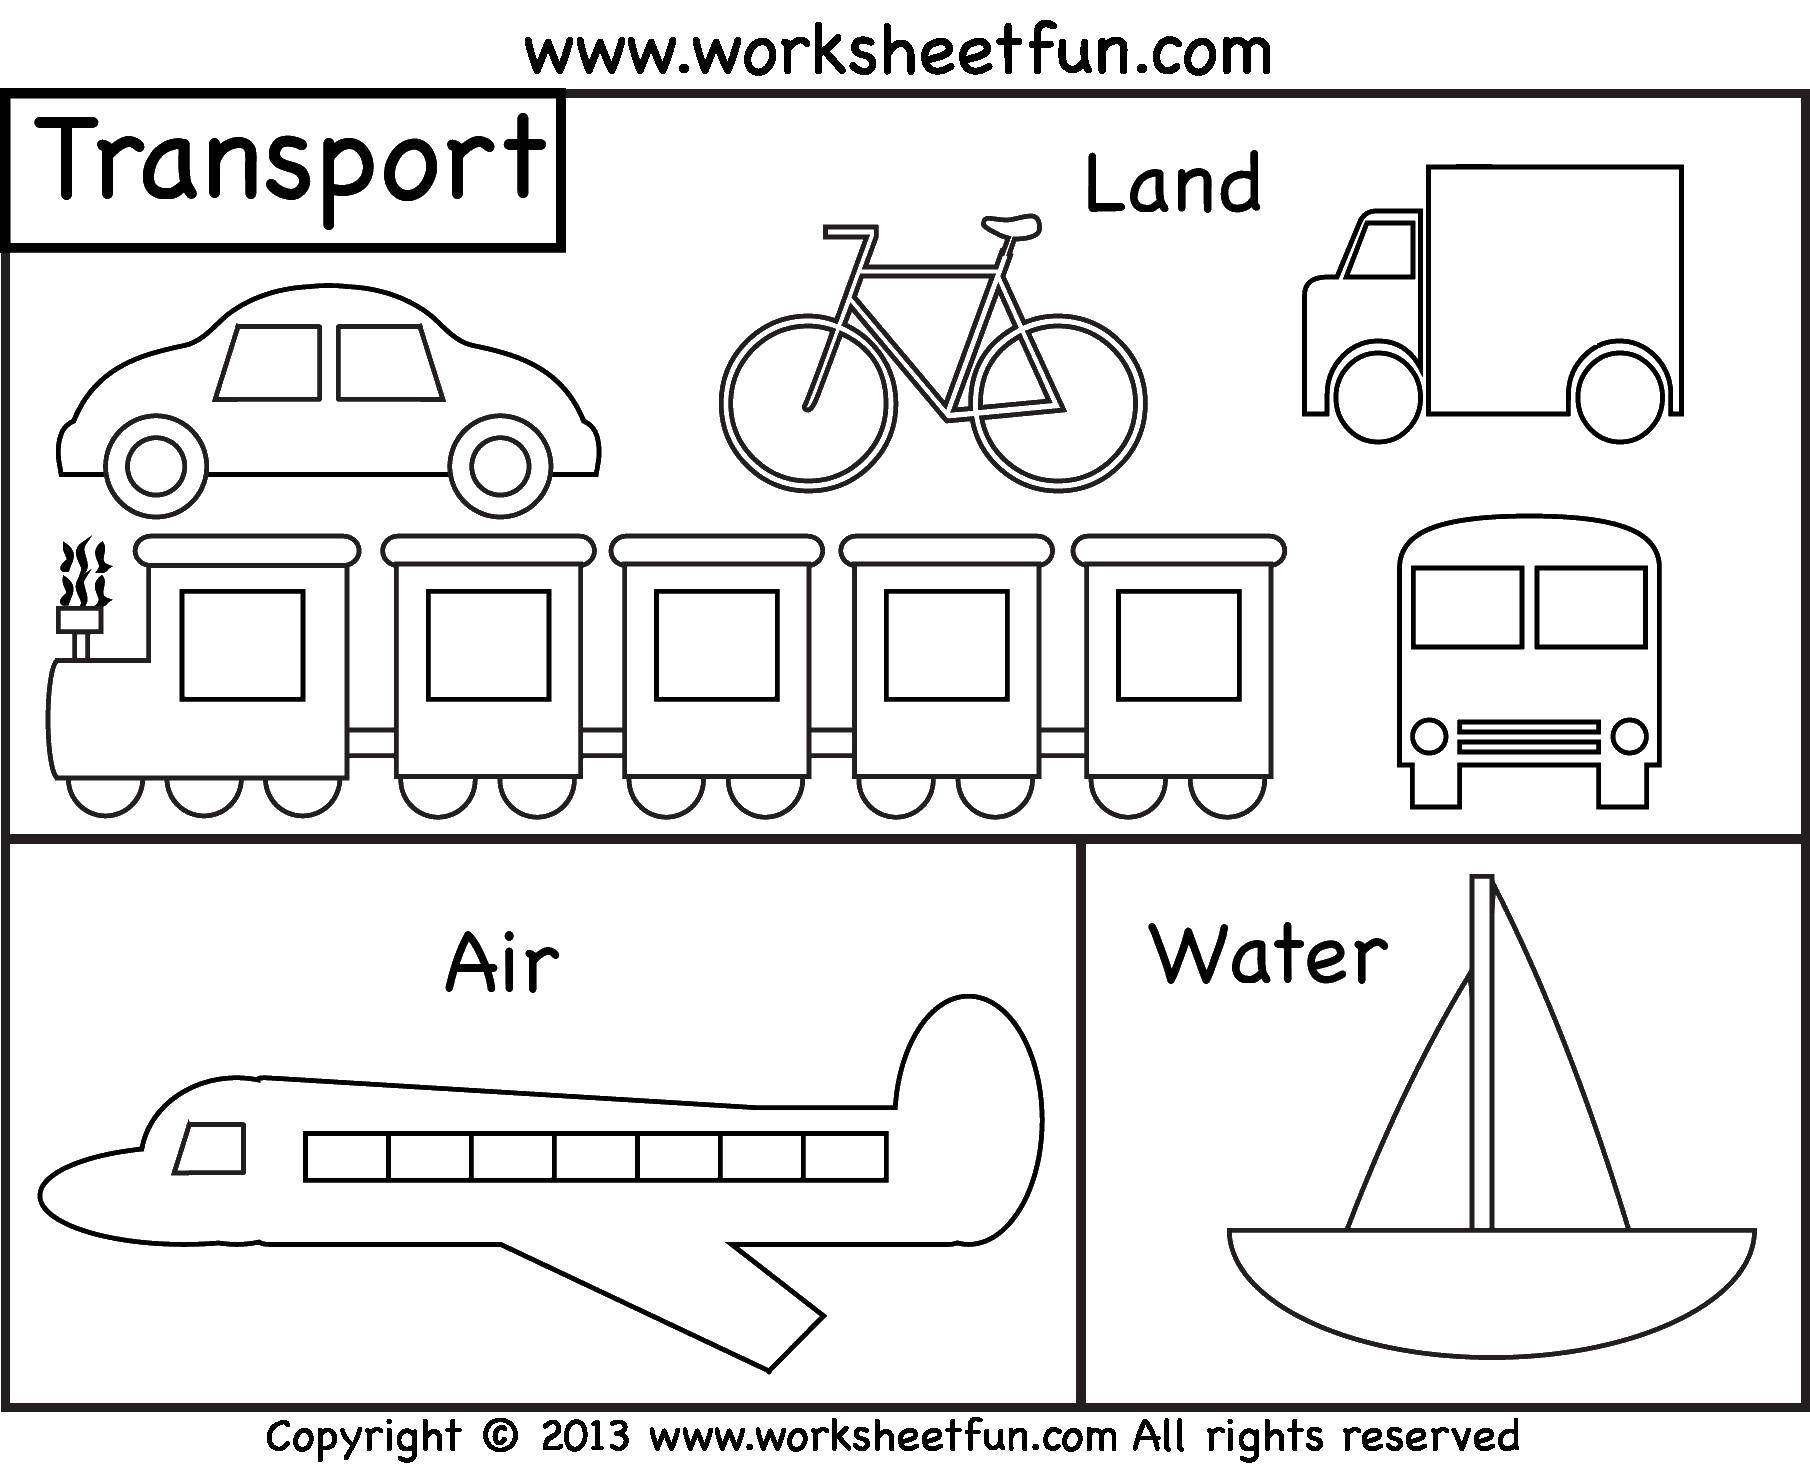 Coloring Land, air, water transport. Category transportation. Tags:  land, air, water transport.